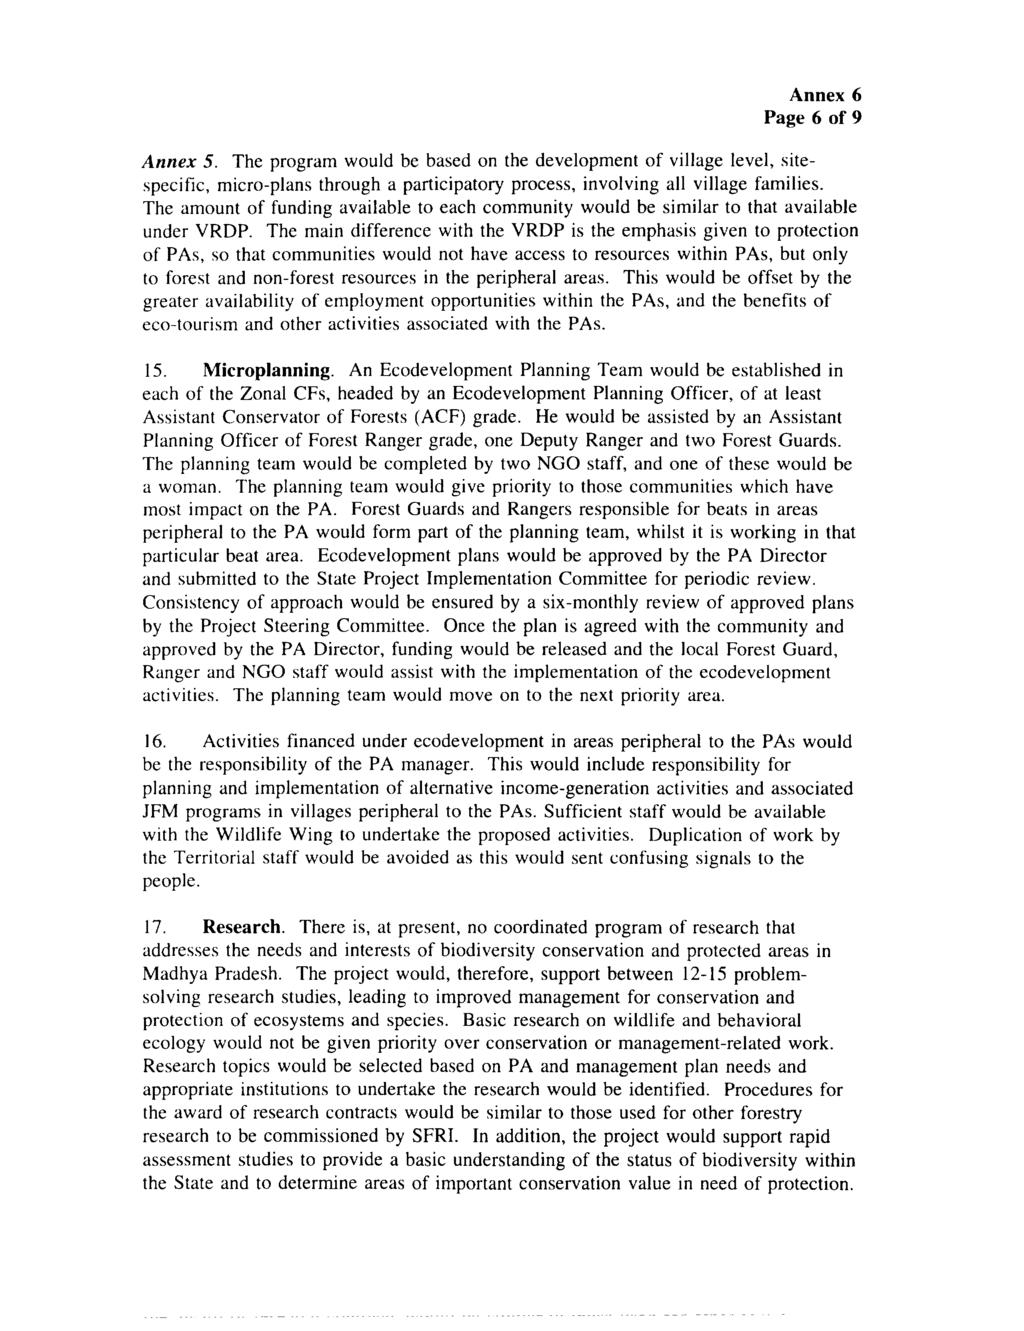 Annex 6 Page 6 of 9 Annex 5. The program would be based on the development of village level, sitespecific, micro-plans through a participatory process, involving all village families.